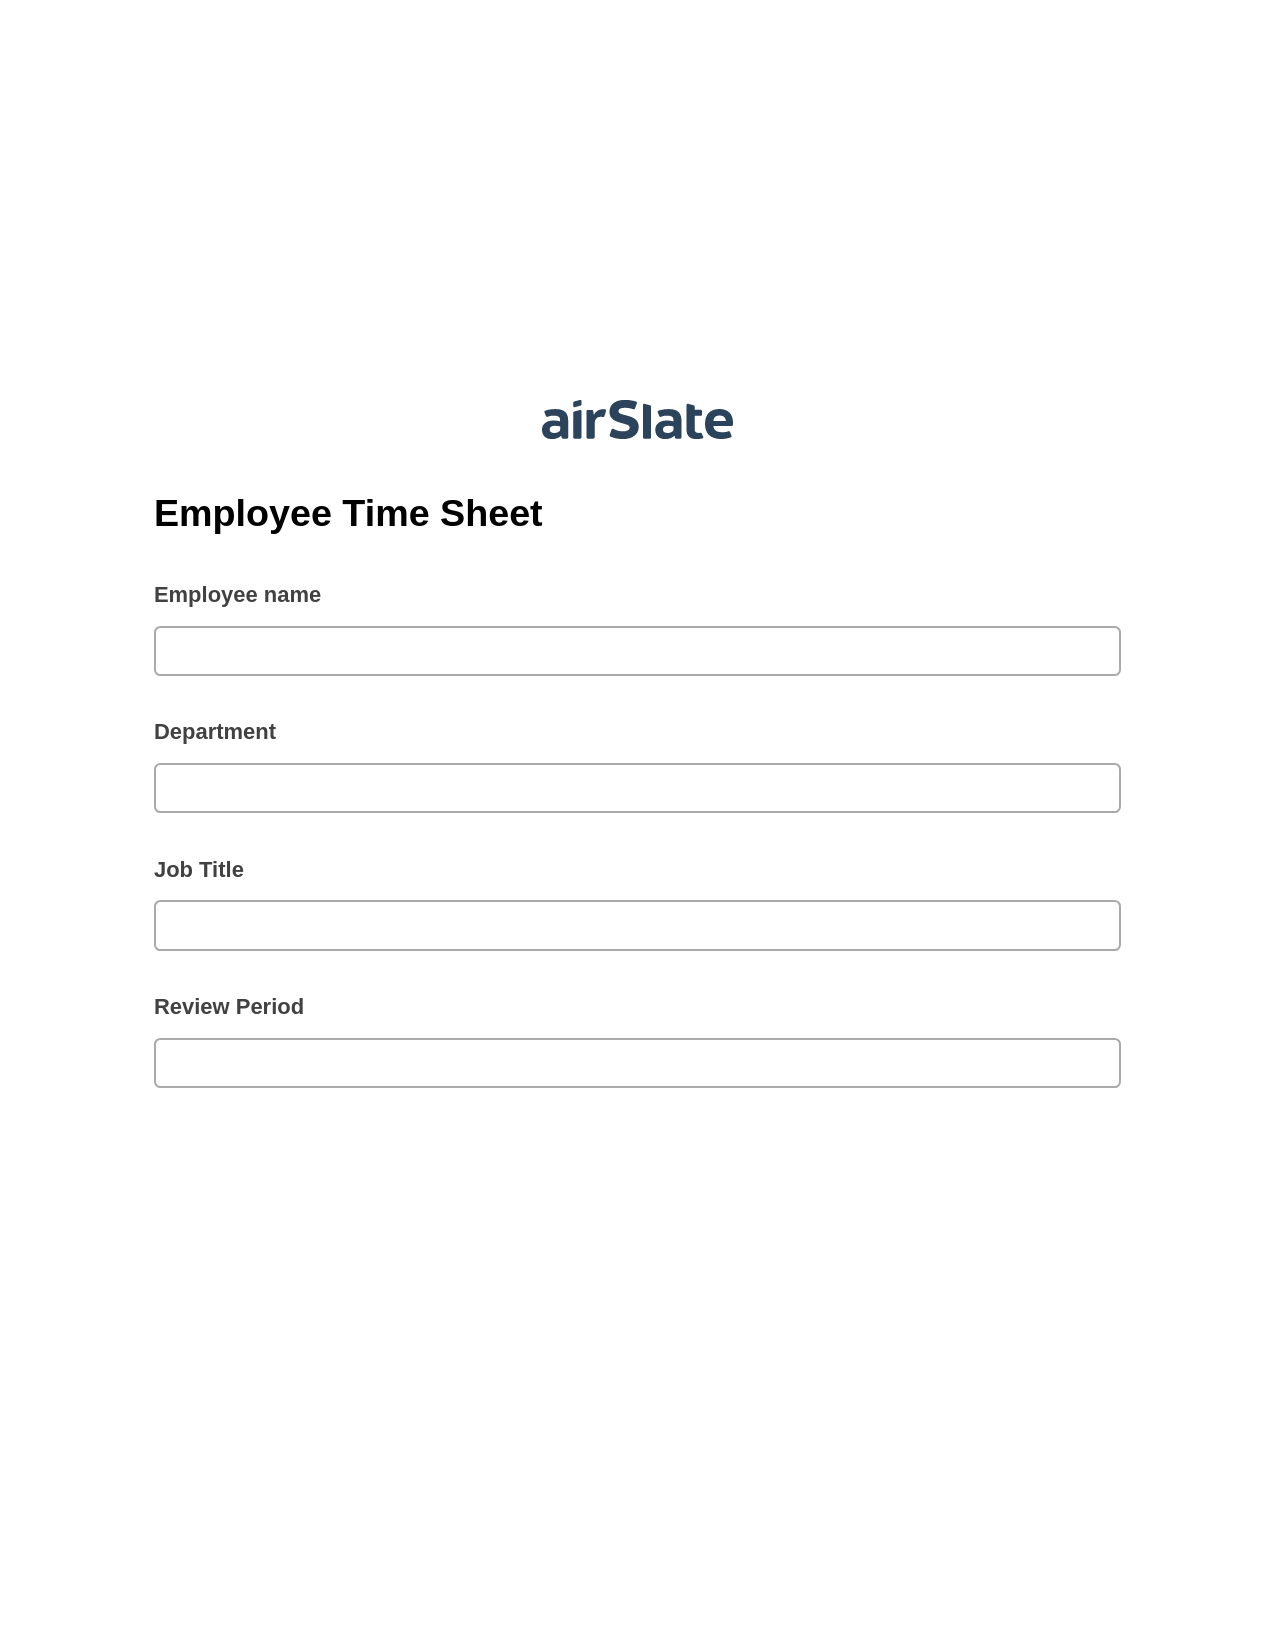 Employee Time Sheet Pre-fill from Excel Spreadsheet Bot, Create Salesforce Records Bot, Export to Salesforce Record Bot